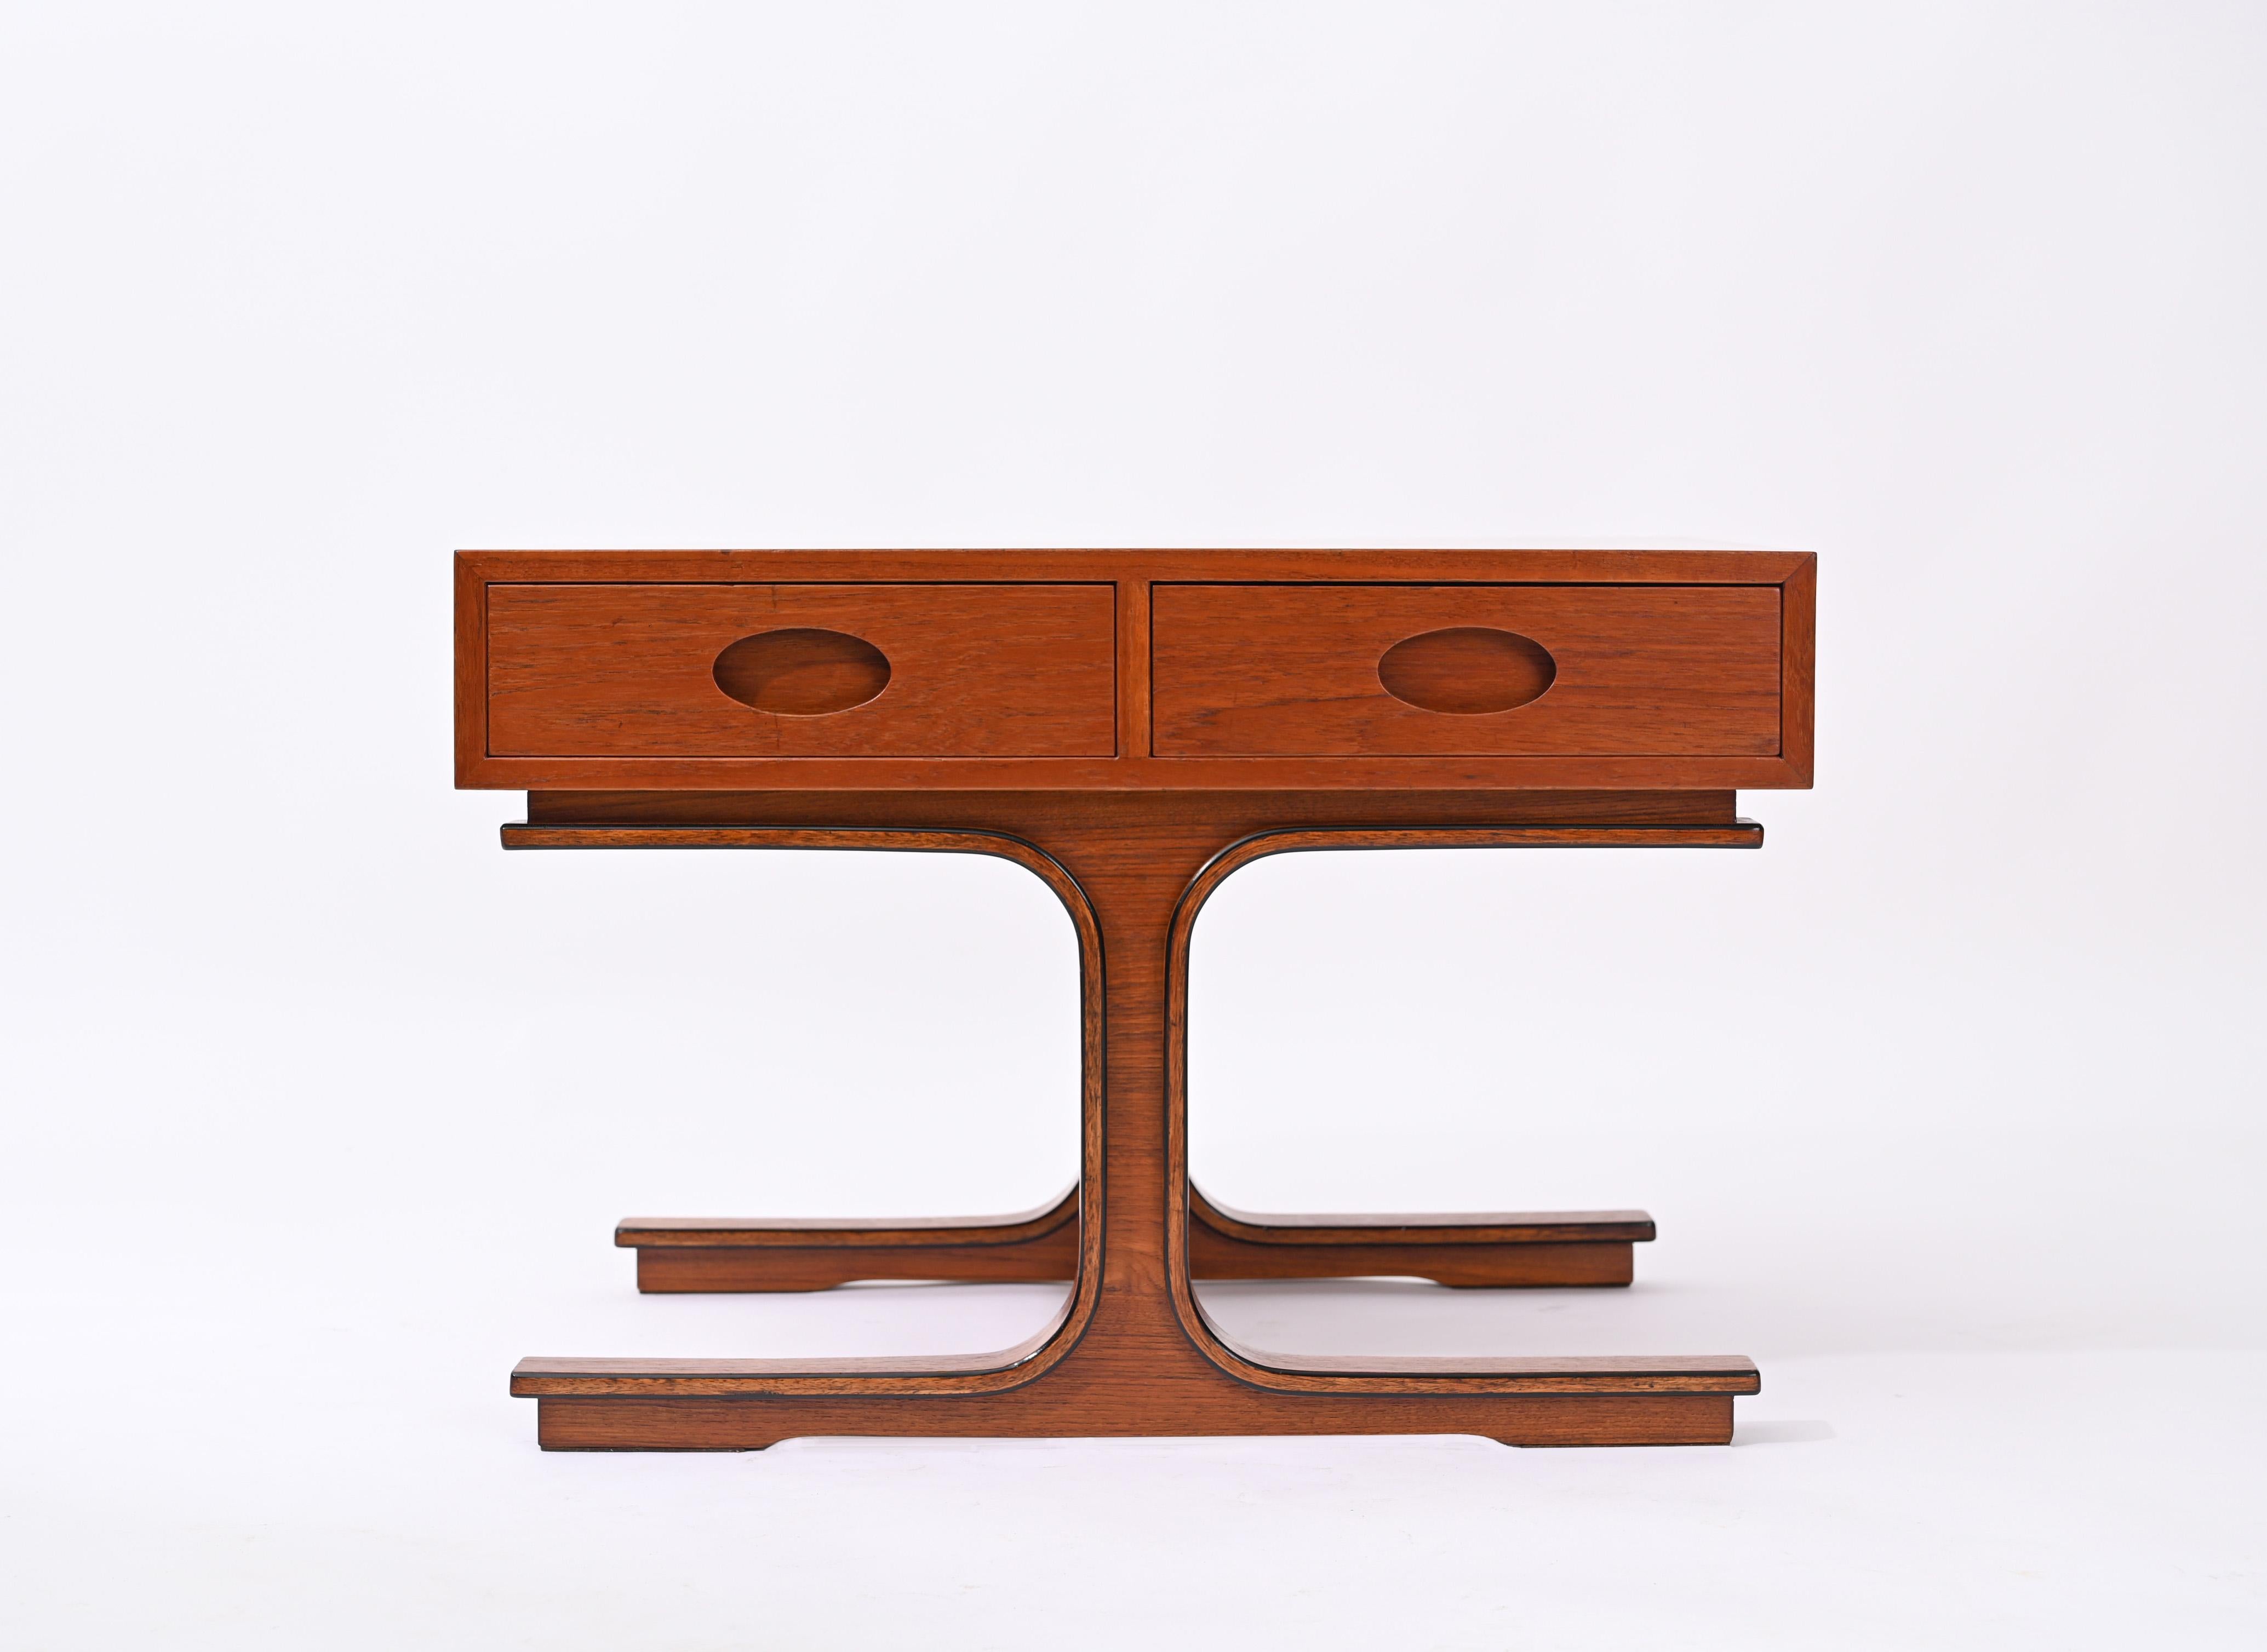 Astonishing coffee table mod. 554 designed by Gianfranco Frattini in 1957 for Bernini. Versatile and elegant 

This incredibly elegant coffee table has two drawers with carved handles and the two iconic curved legs are connected by a central